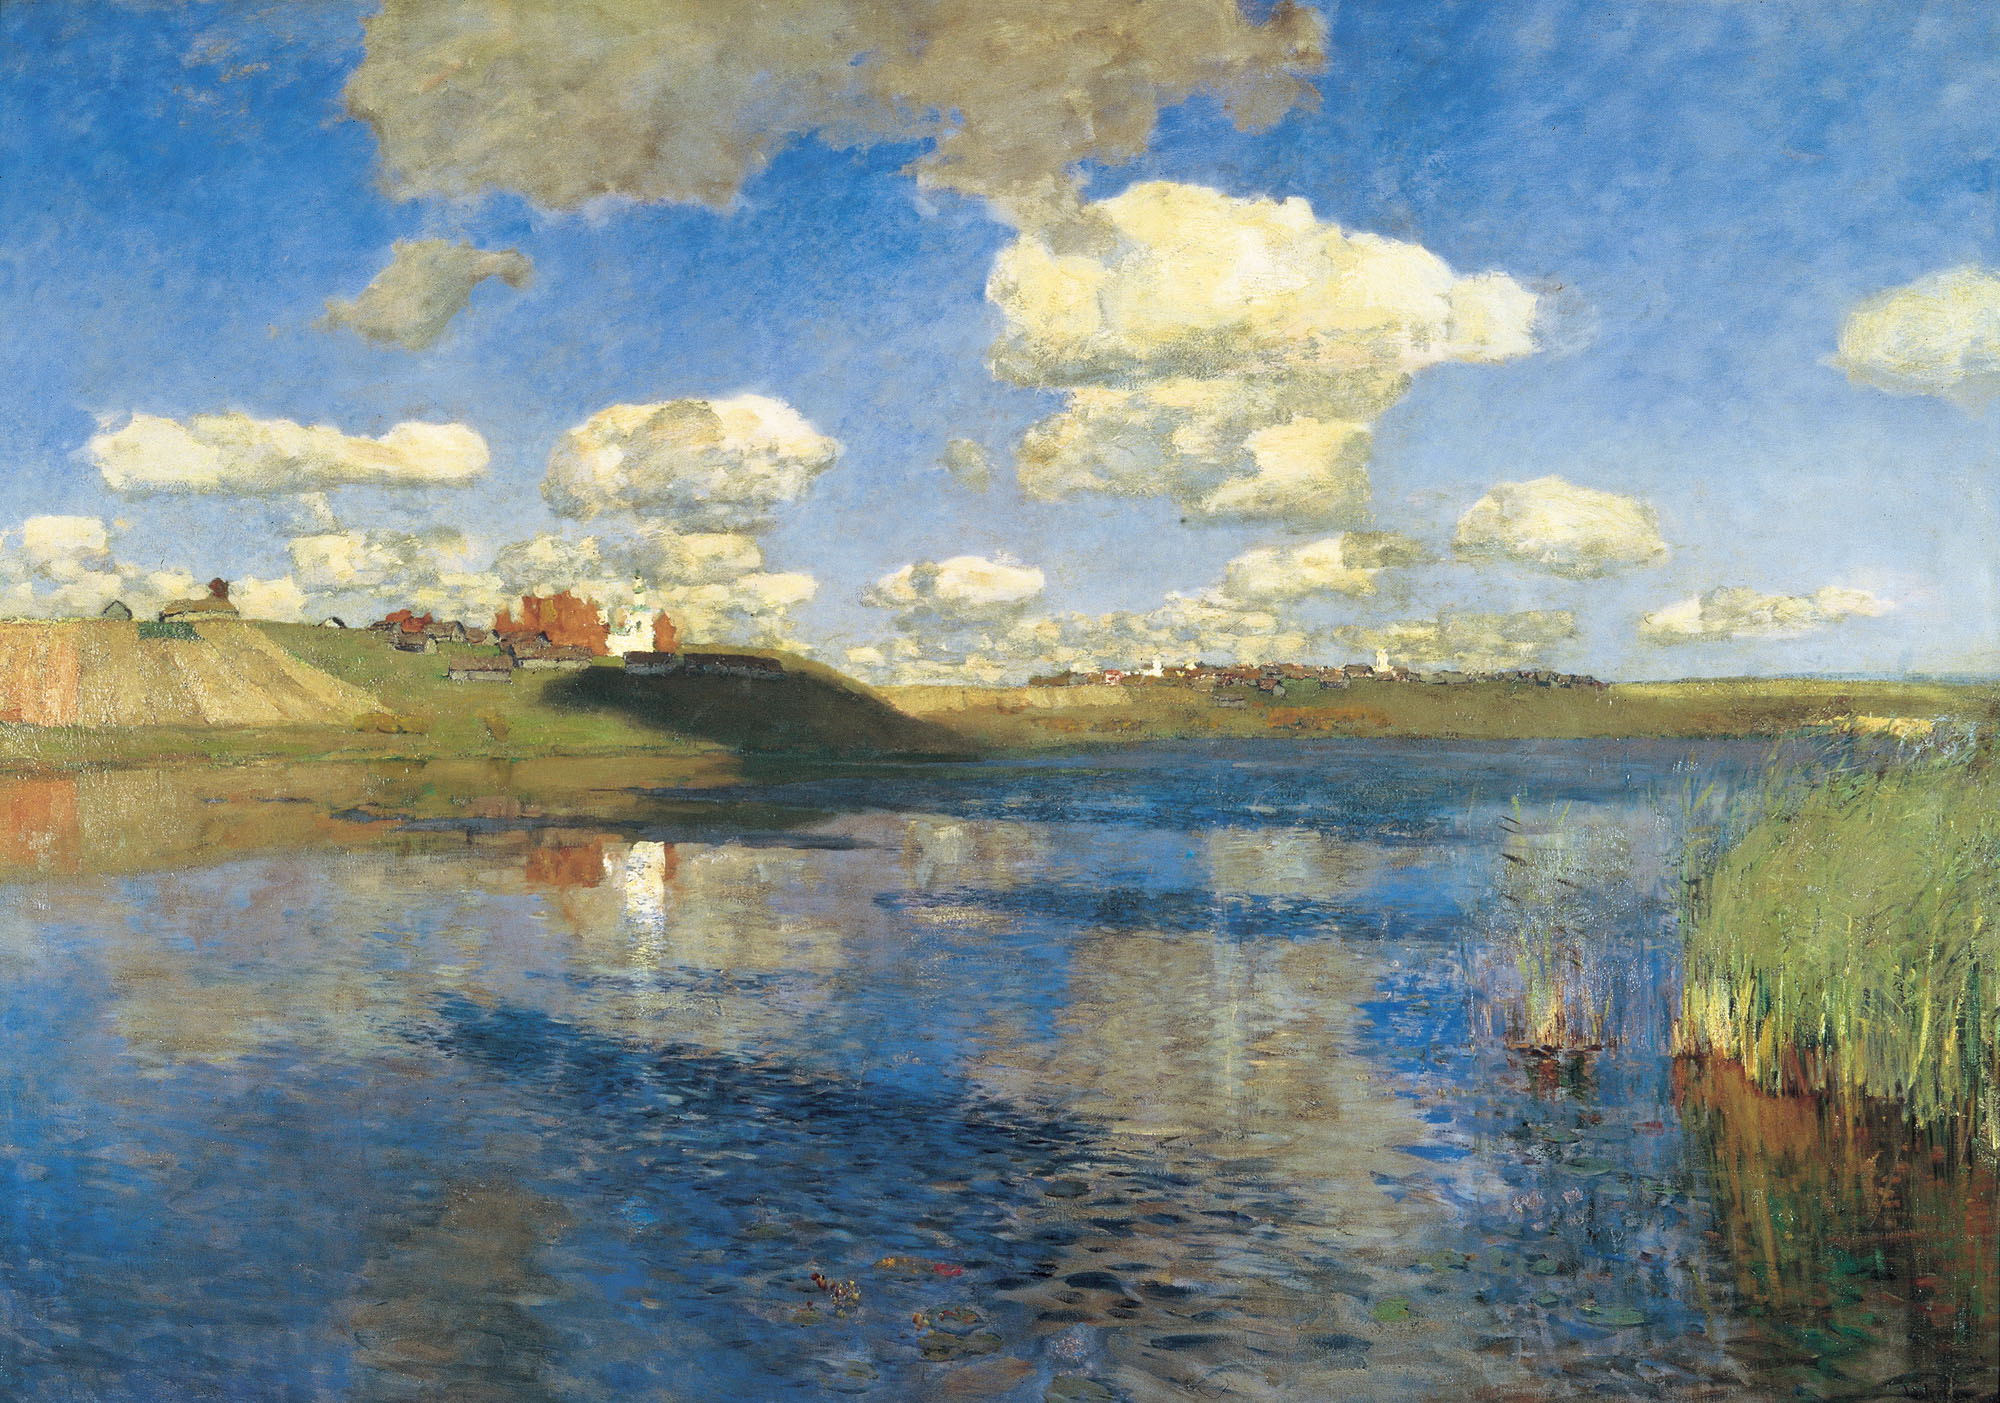 Painting of a lake by Isaac Levitan